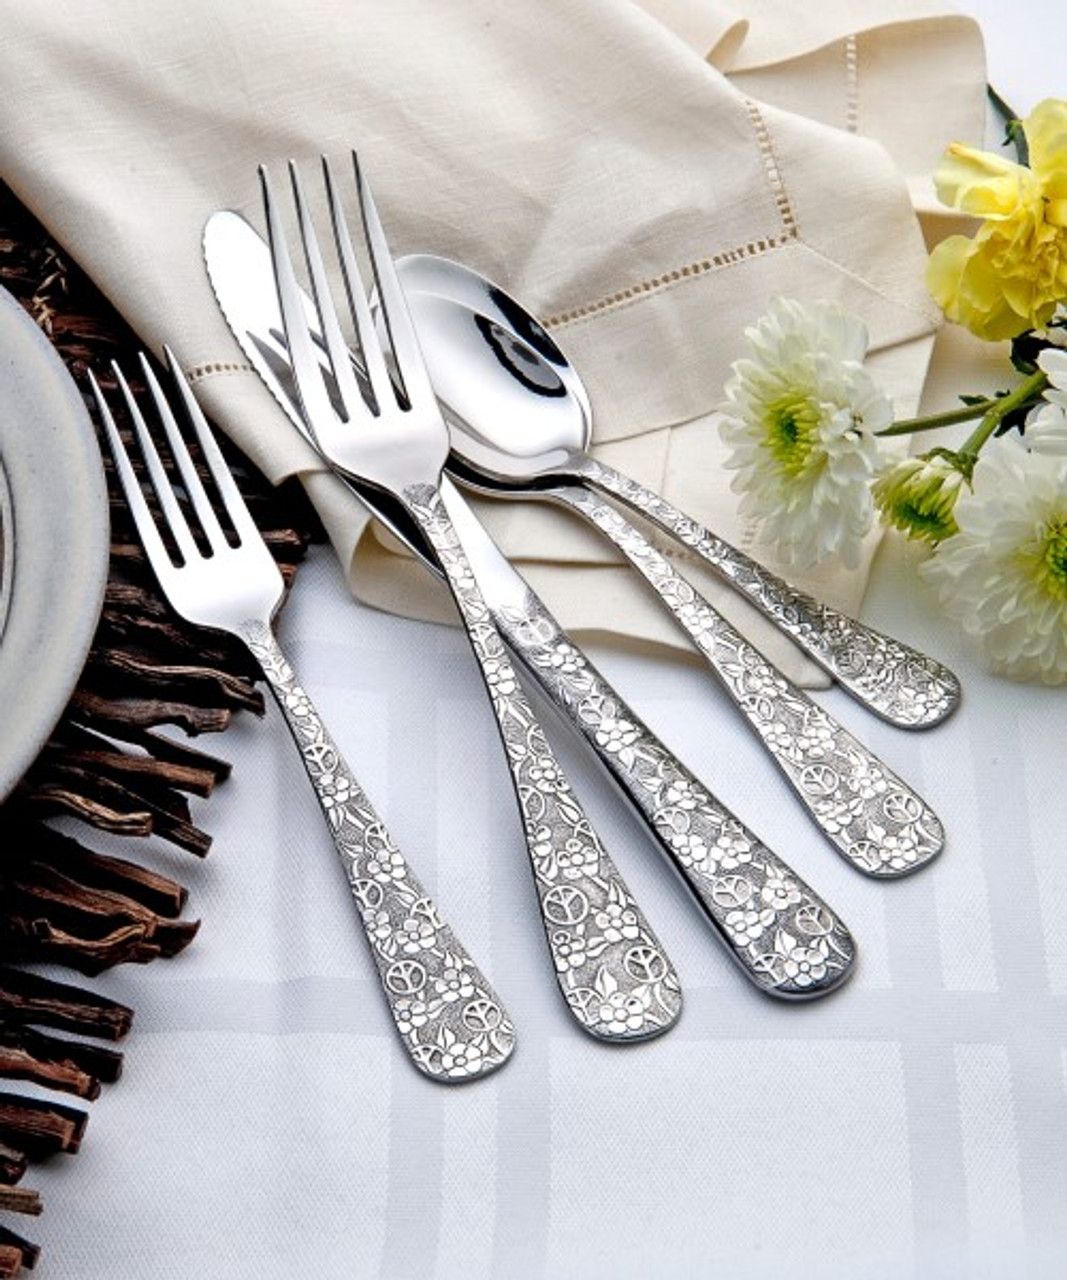 Weave - Liberty Tabletop - The Only Flatware Made in the USA